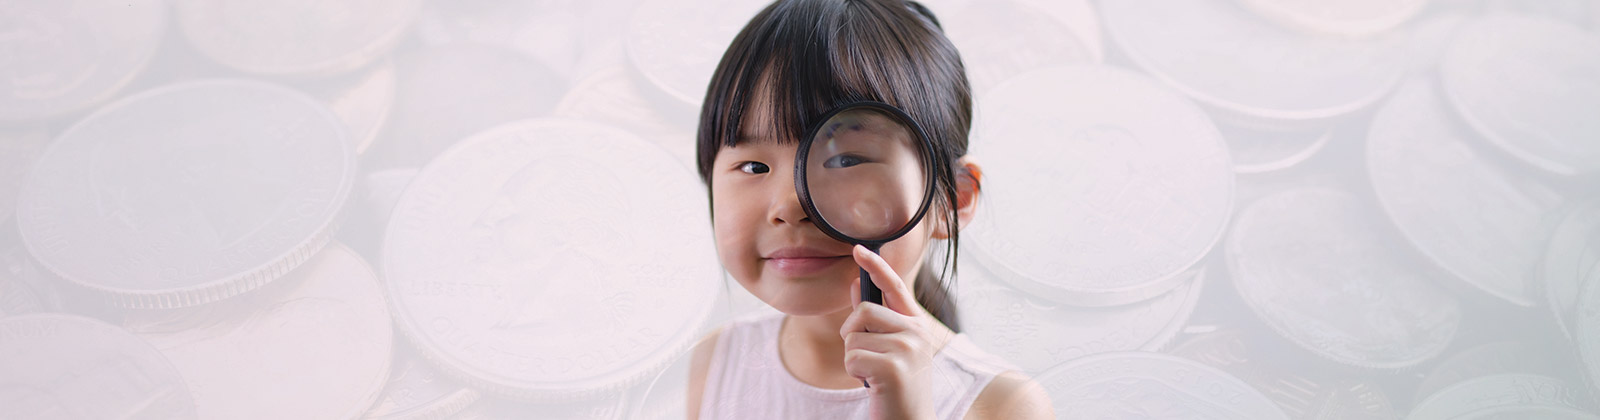 Girl with Magnifying Glass